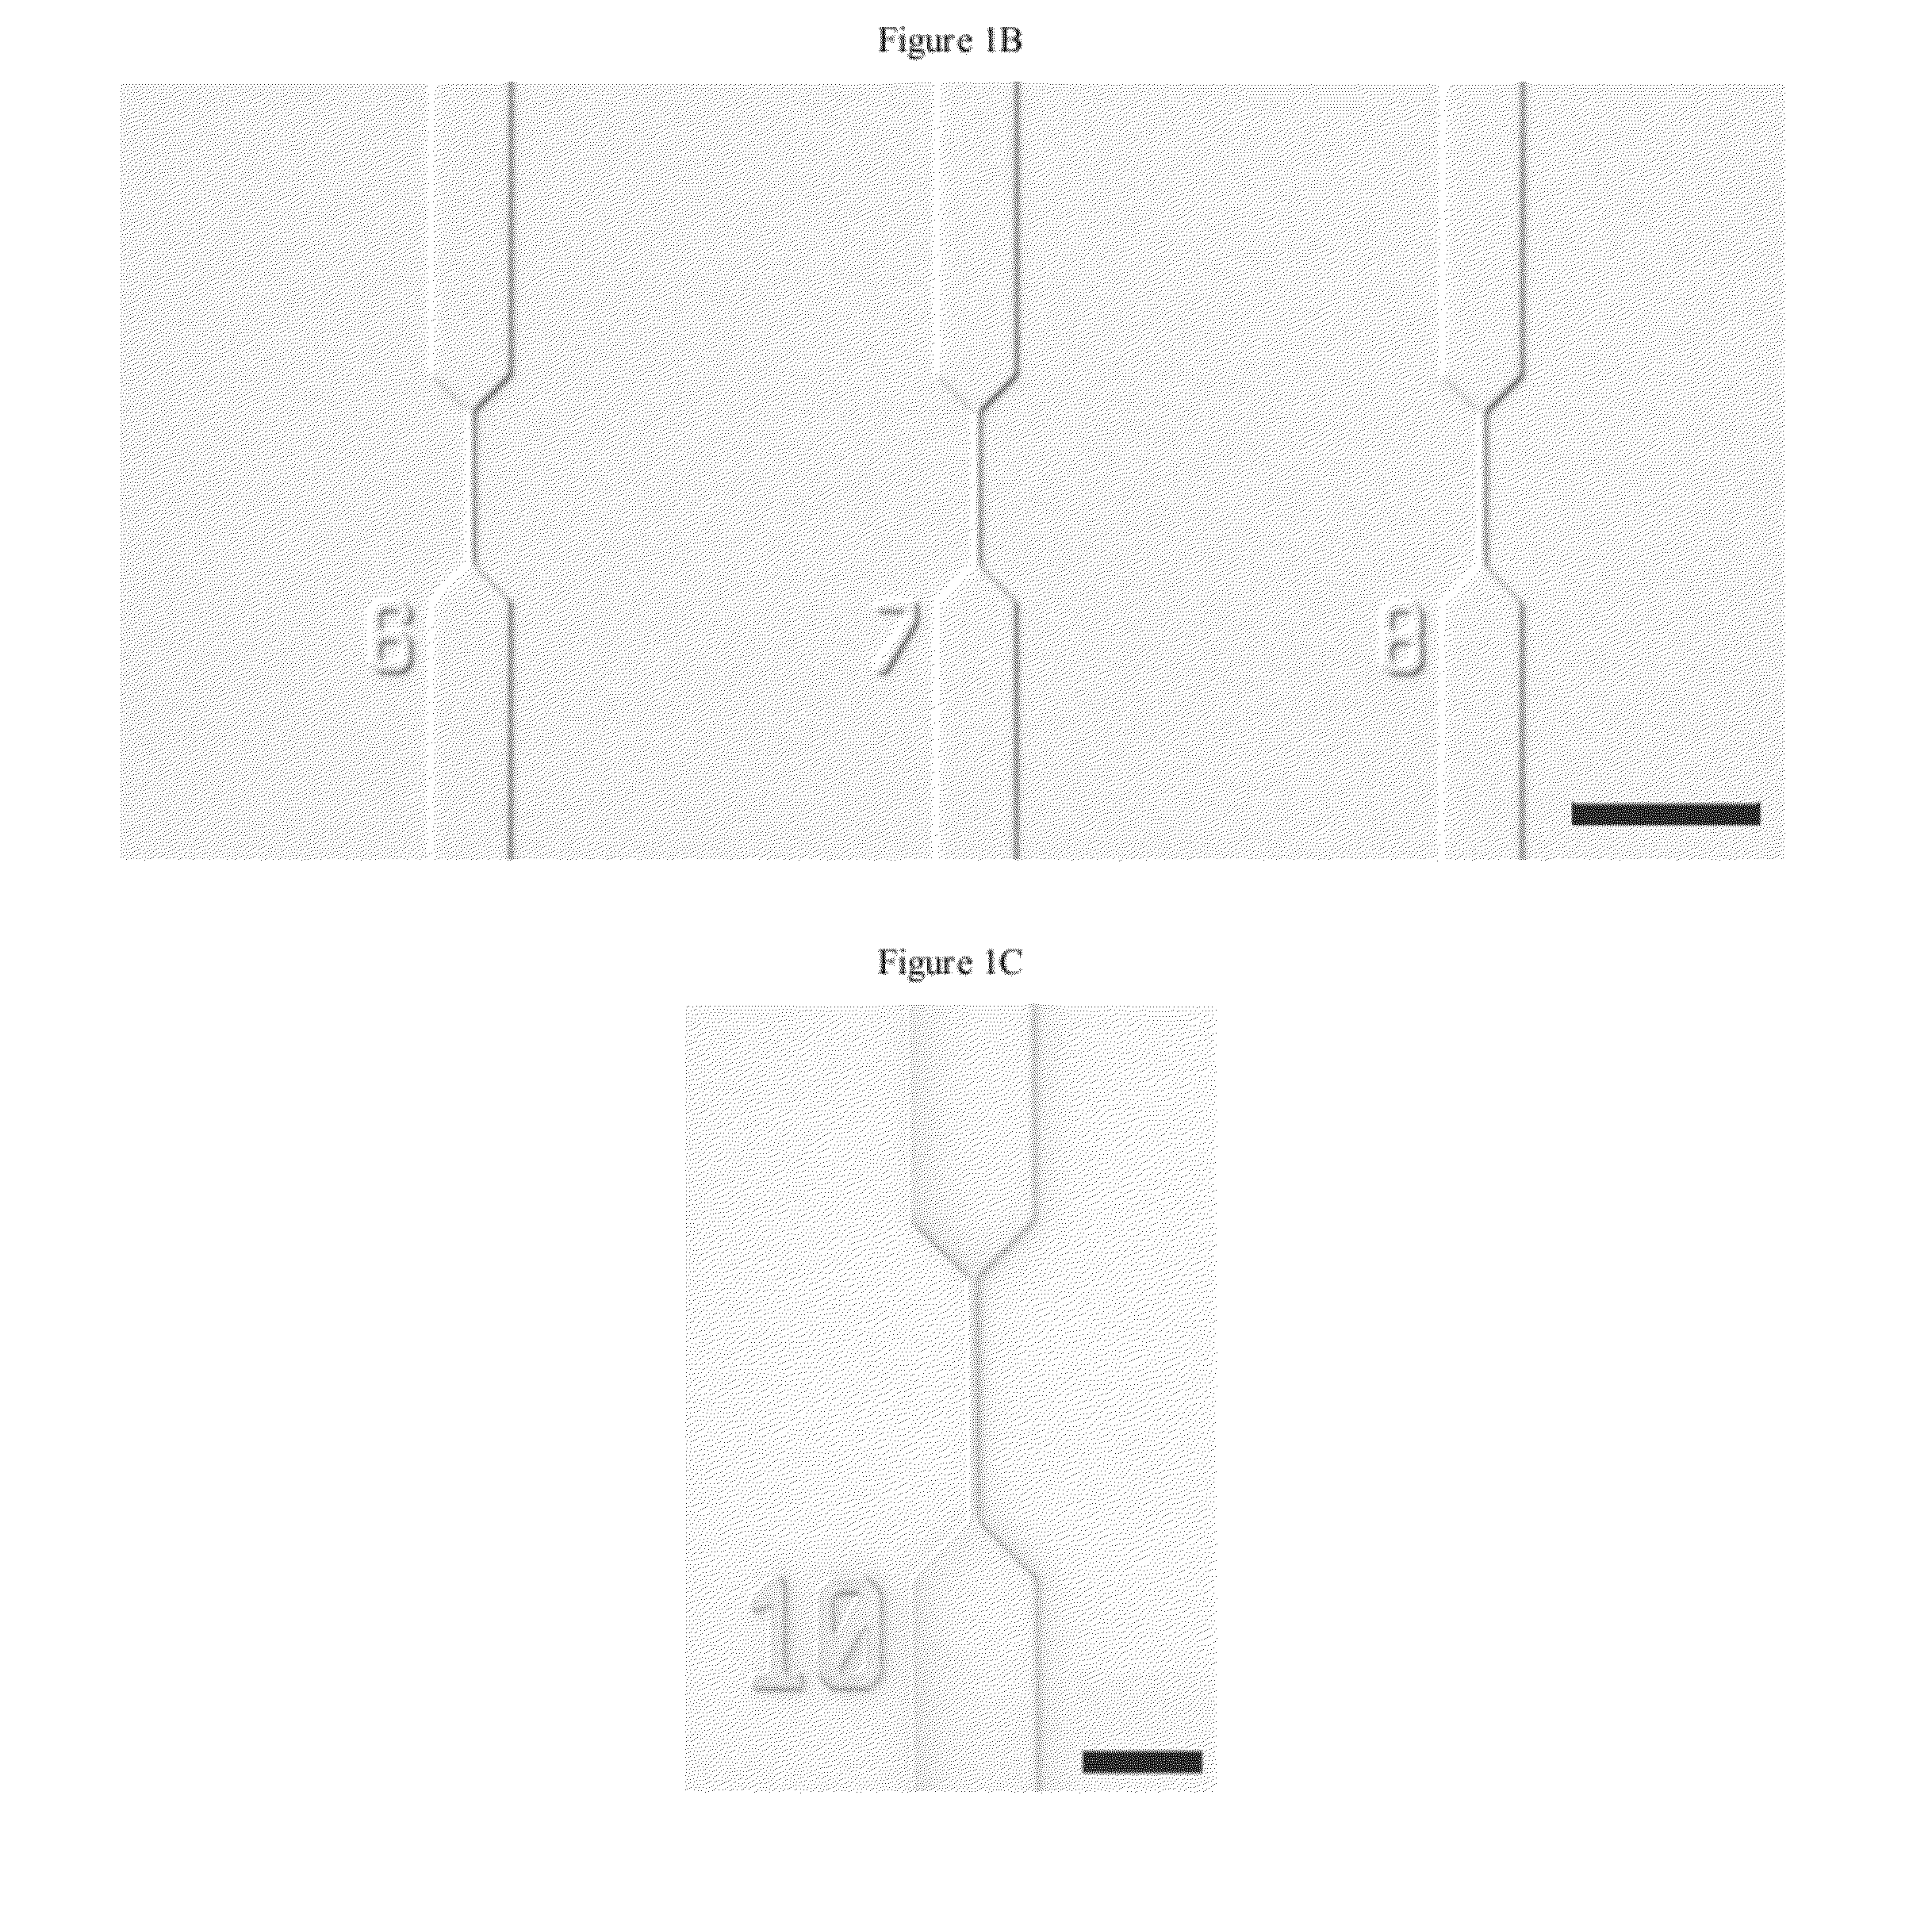 Device and Methods for Epigenetic Analysis